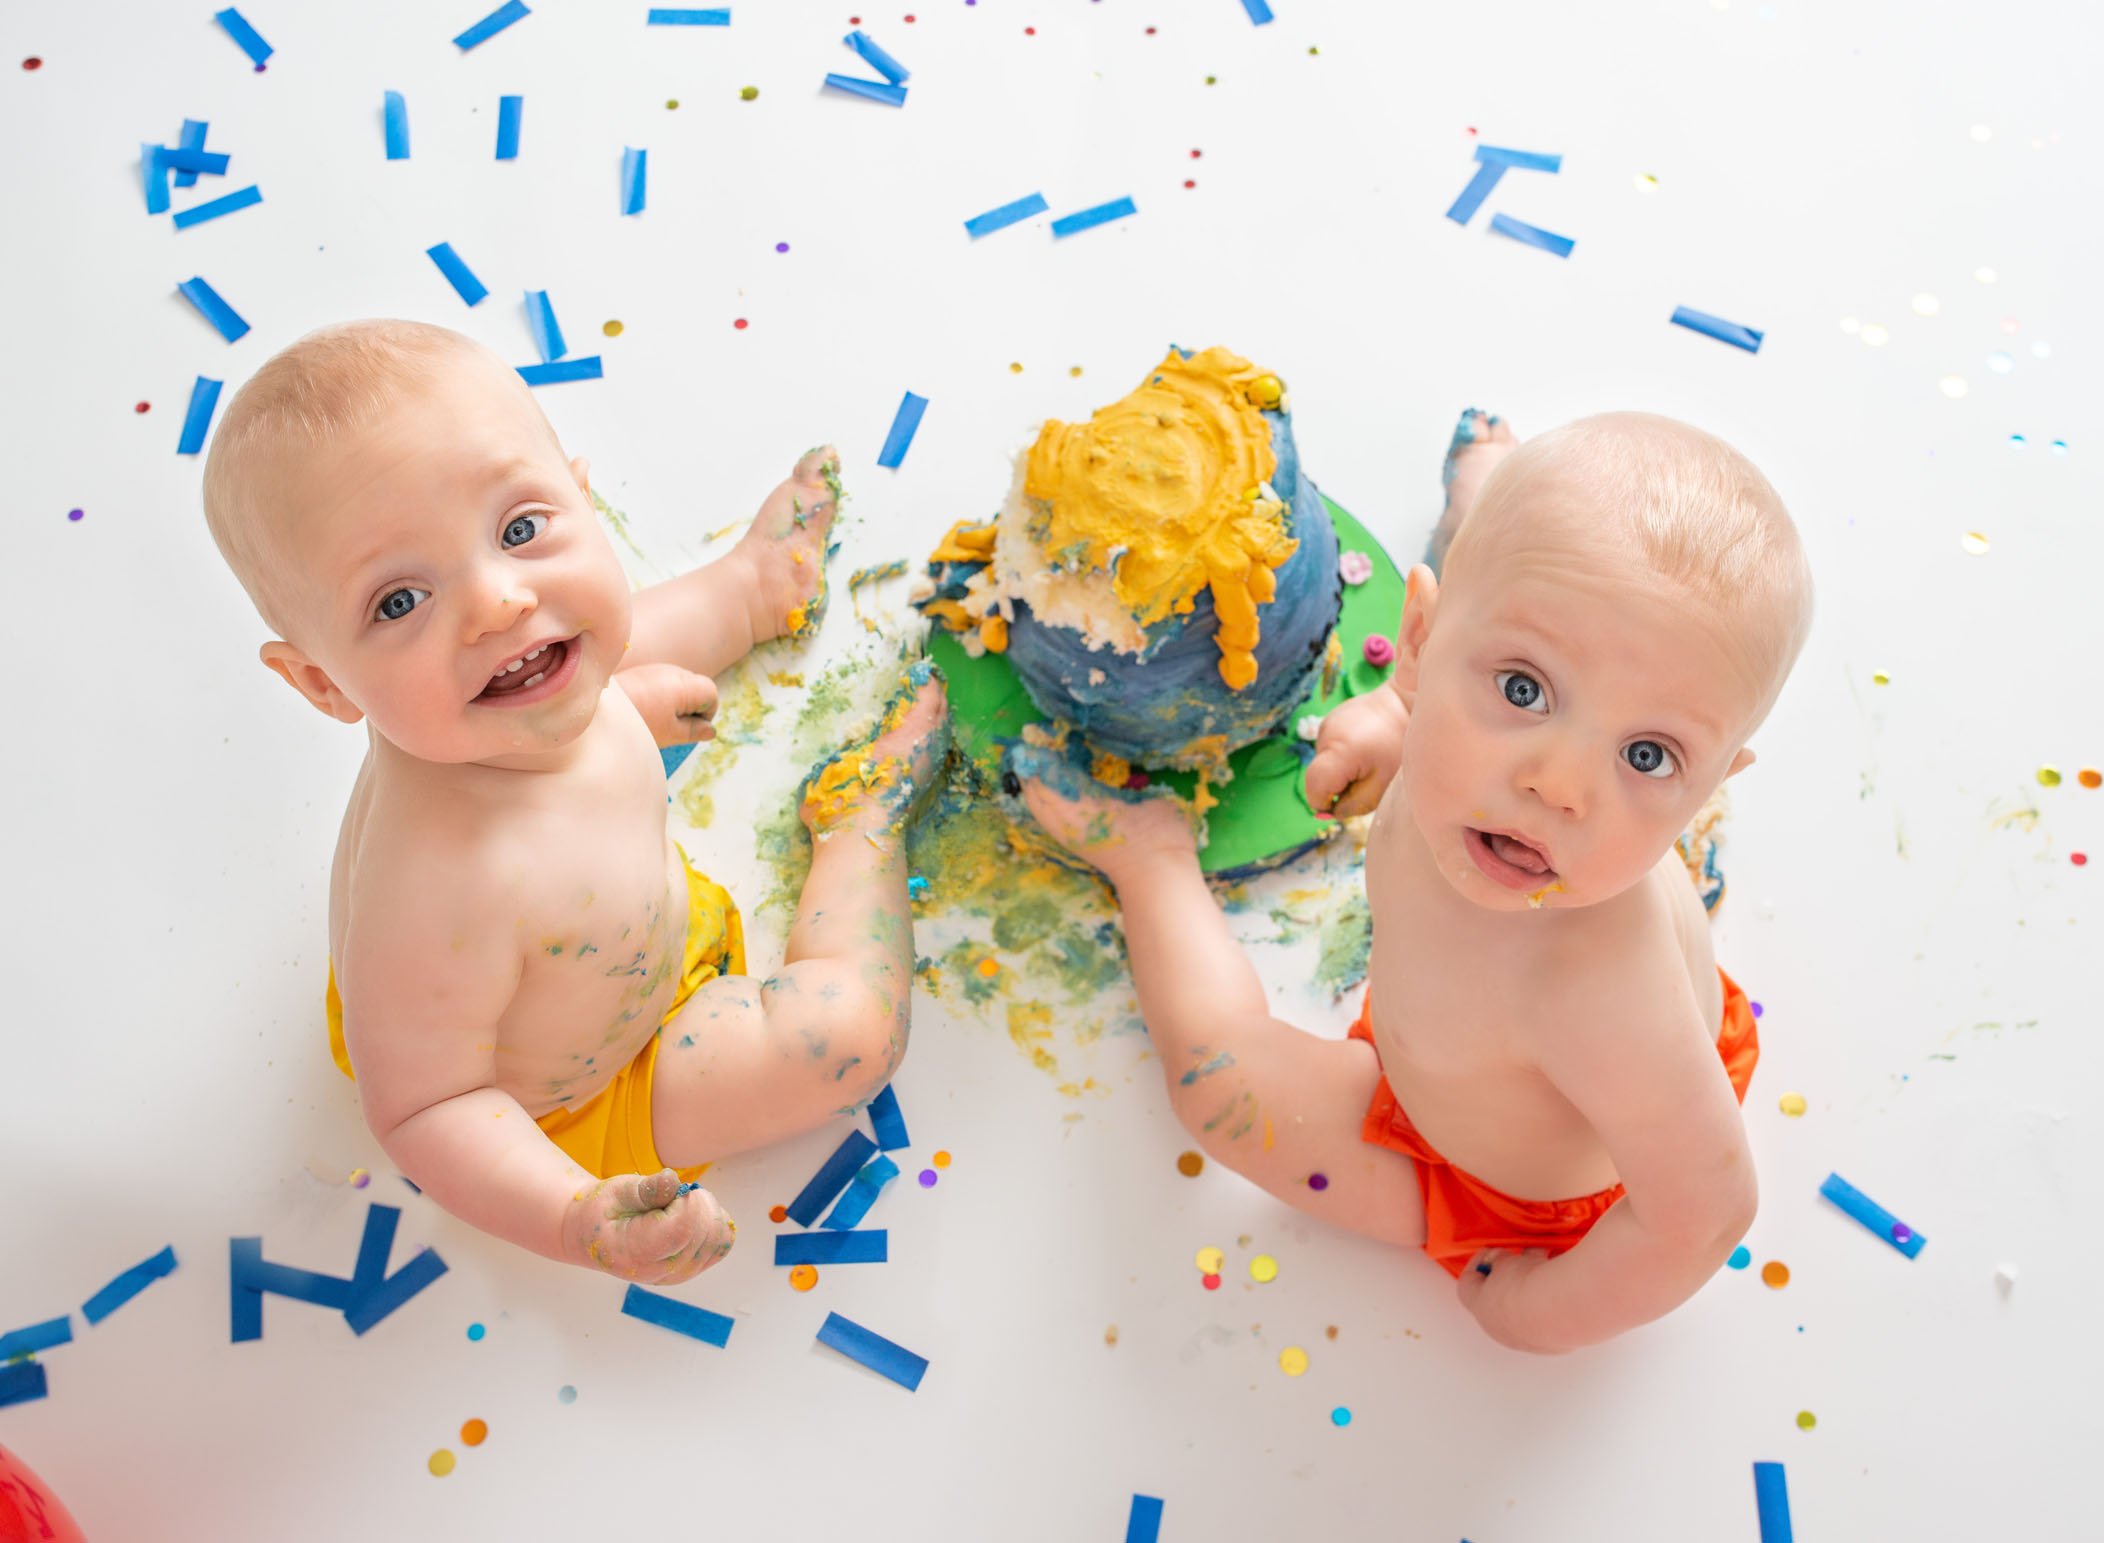 Twin one year old boys look up from their smashed cake